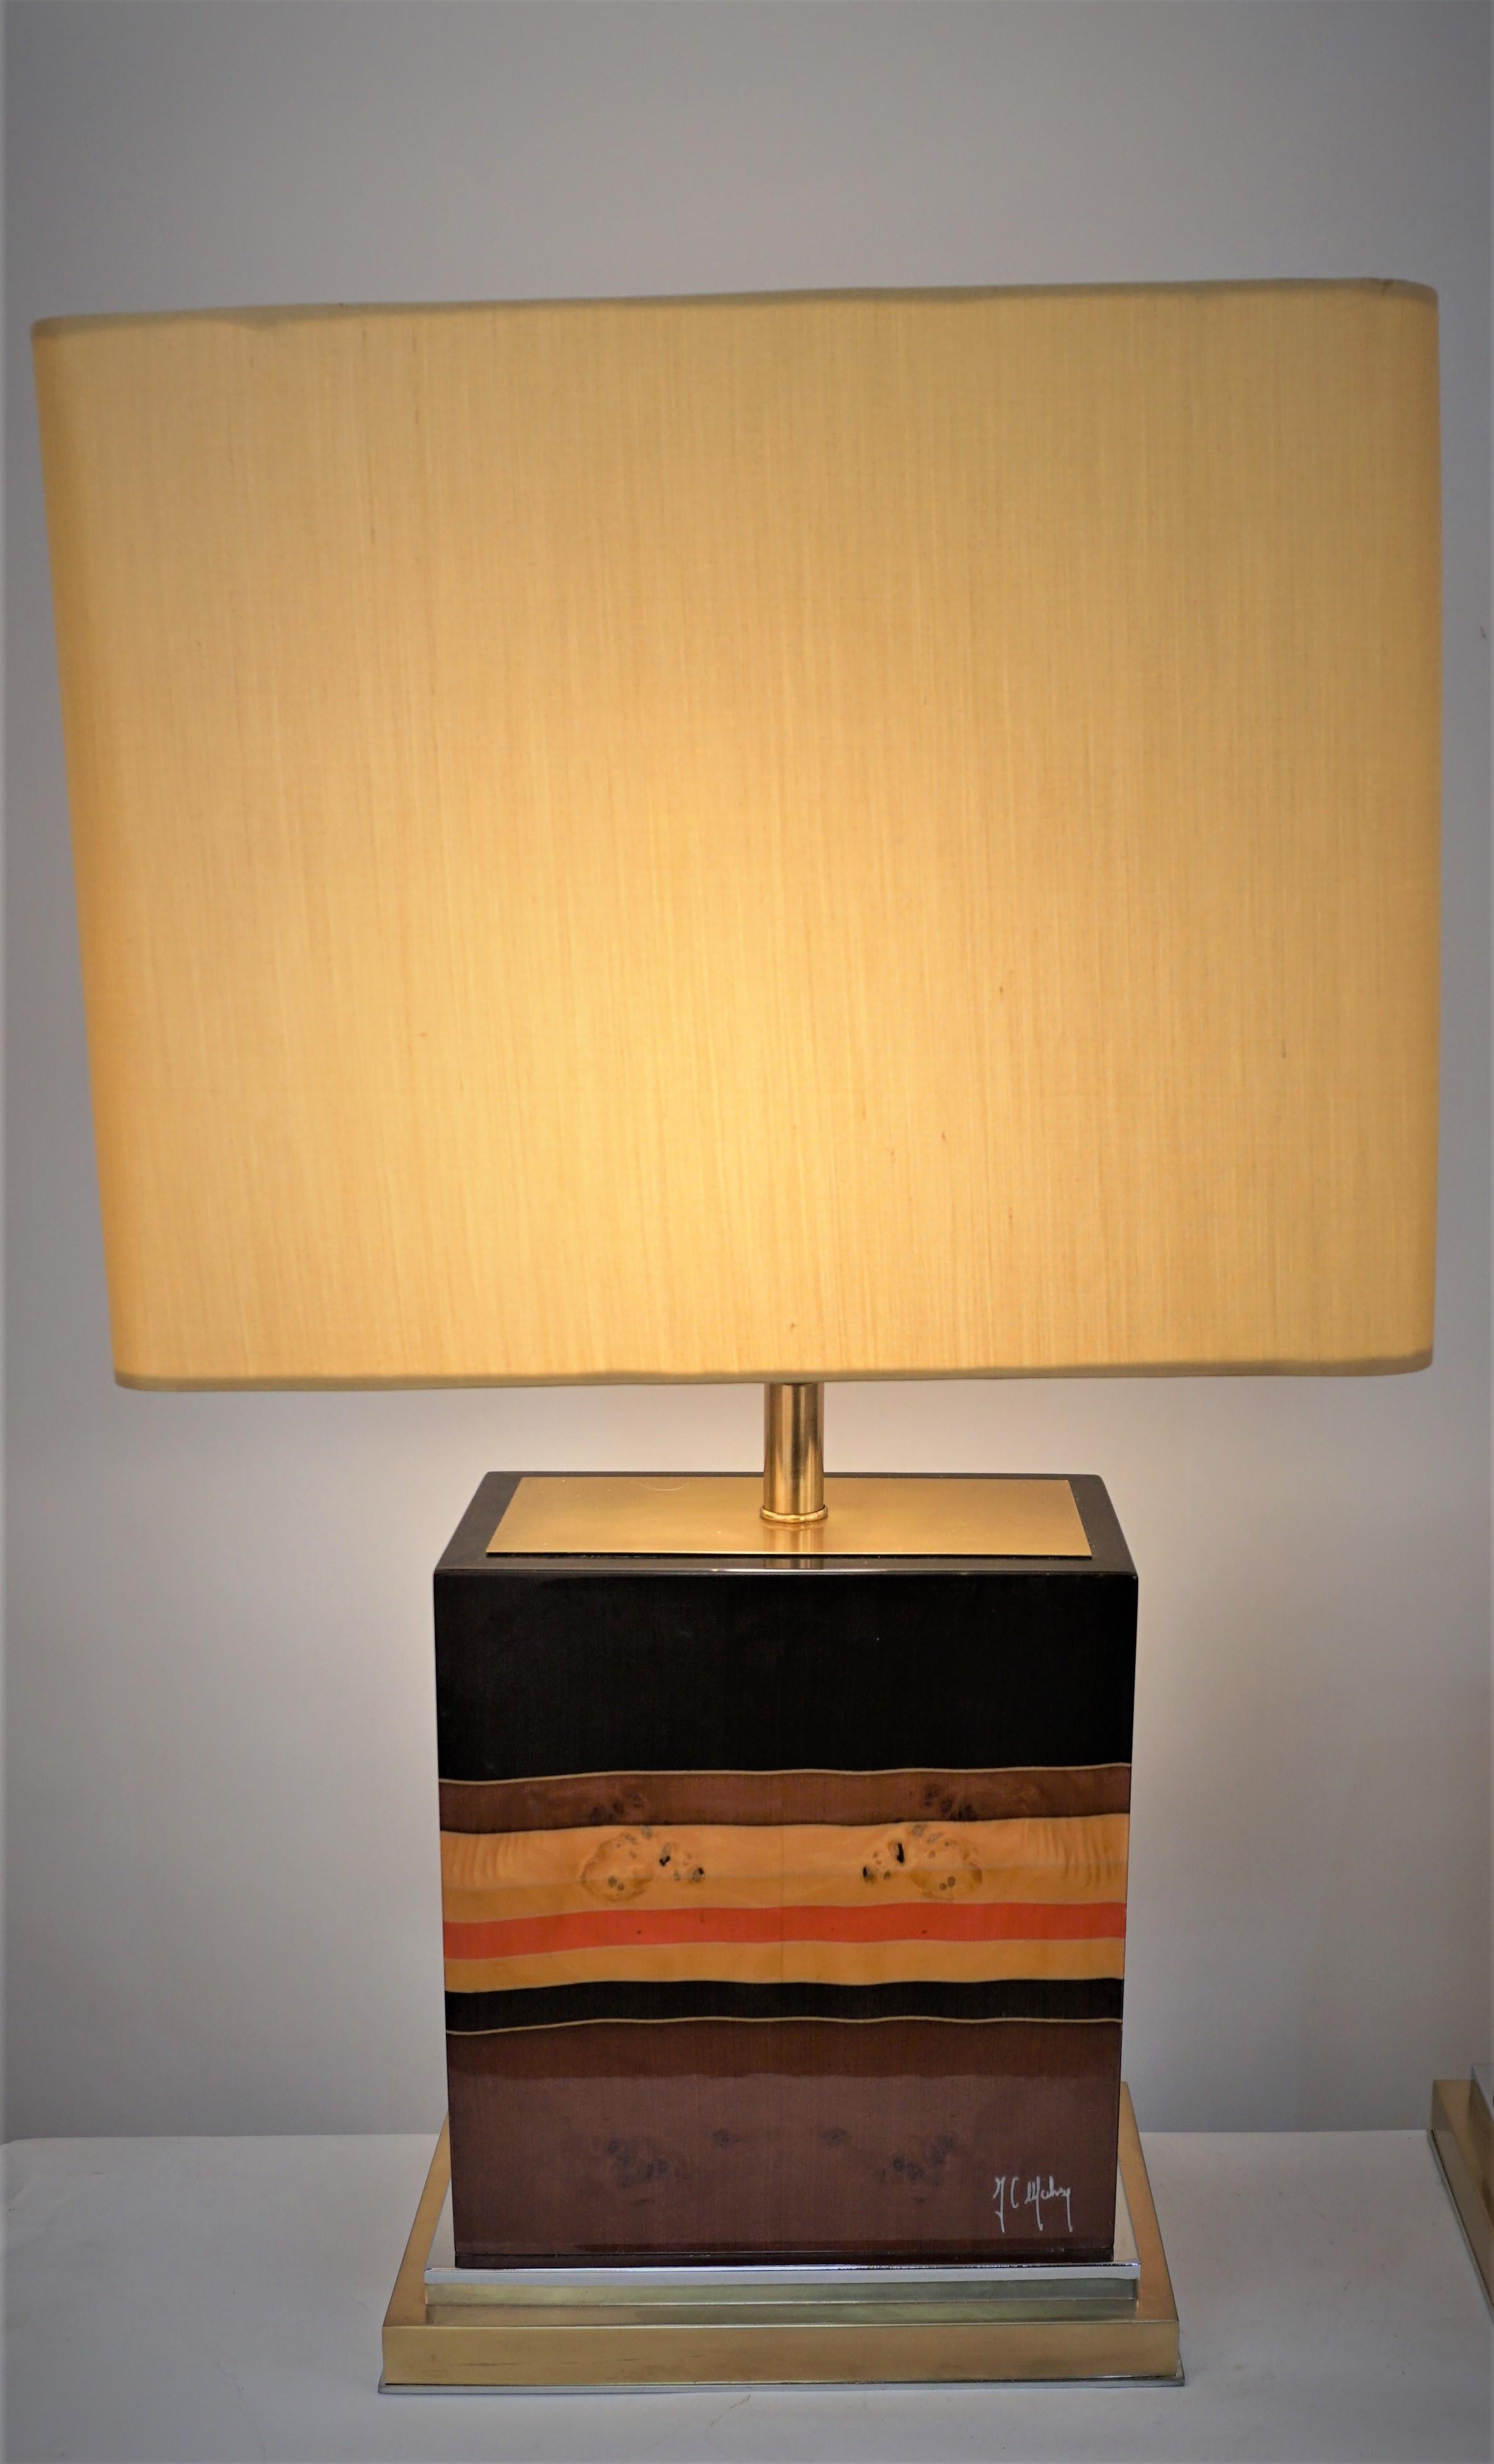 Elegant pair tables lamp designed by Jean Claude Mahey in the 1970's.
These multi color lamps are in heavy lacquer wood bronze and chrome base and hardware. 
Fitted with oblong silk hardback lampshades.